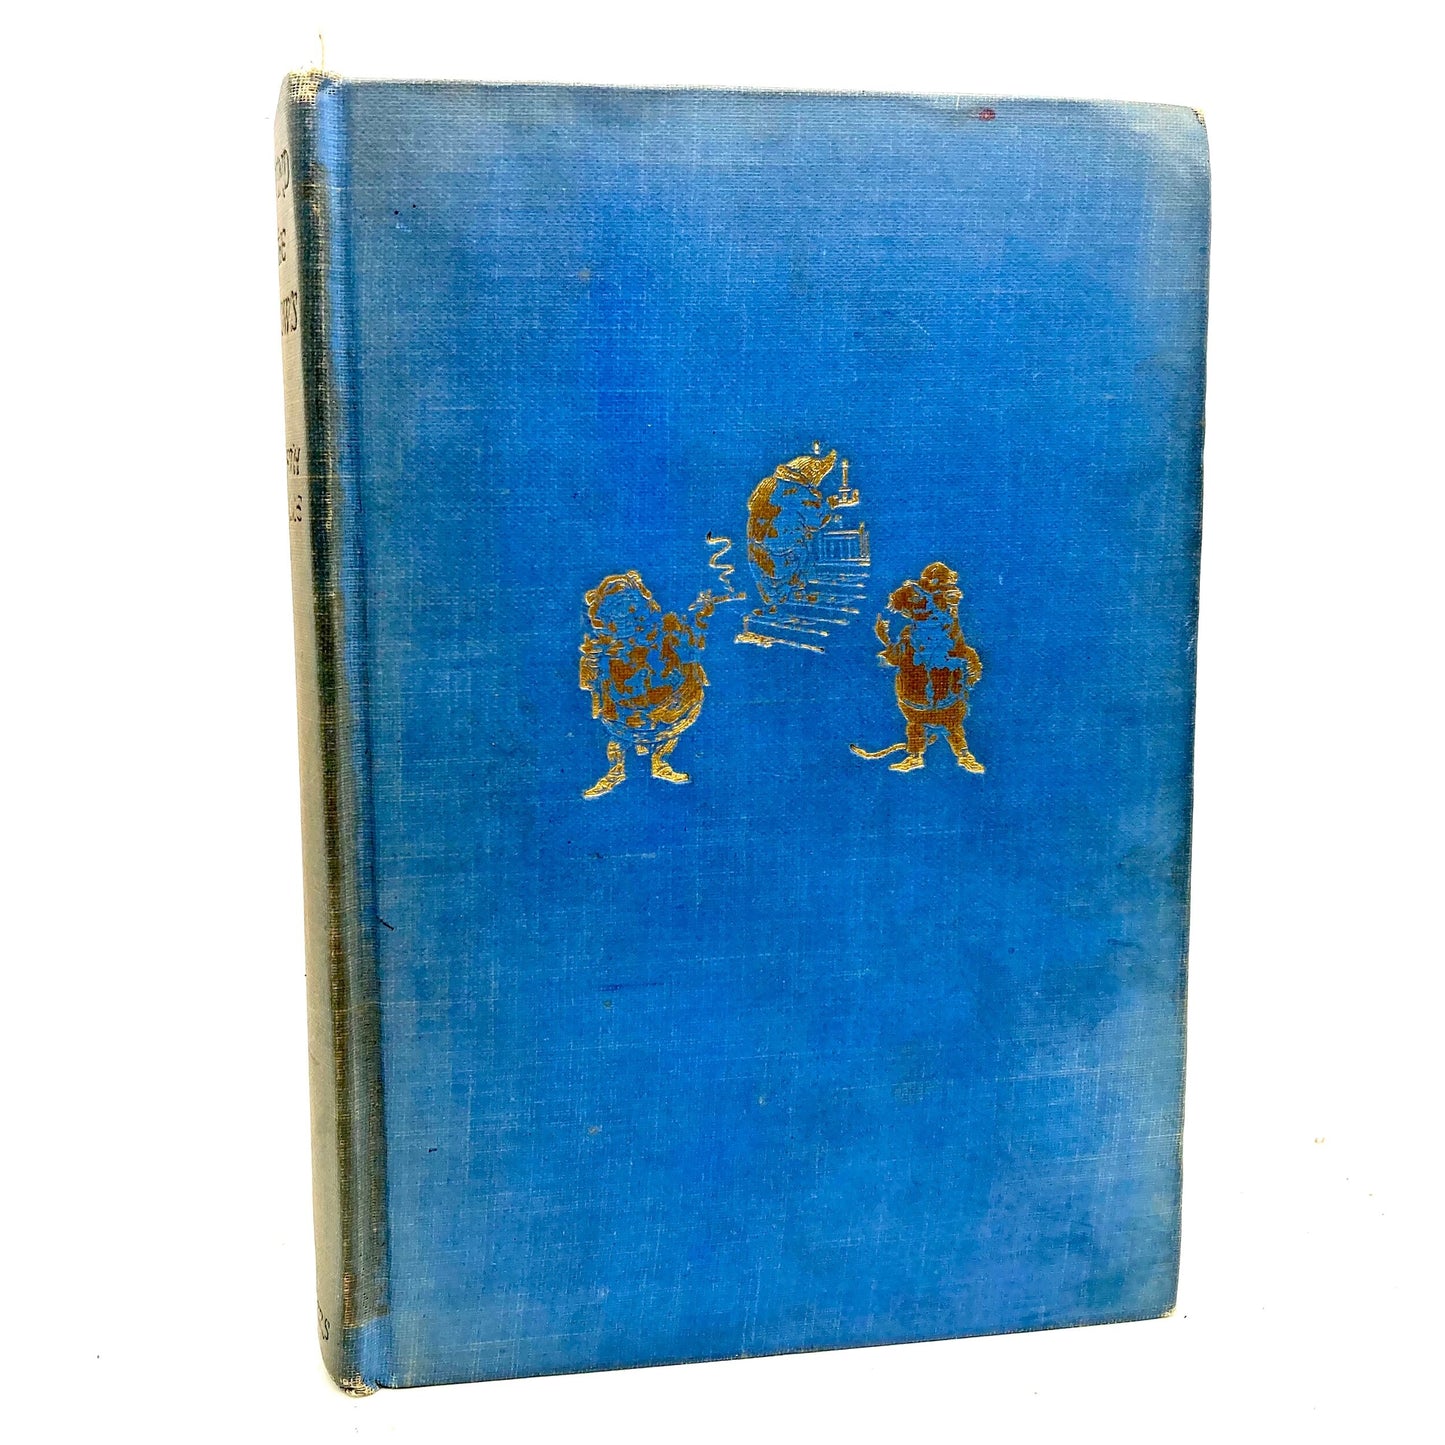 GRAHAME, Kenneth "The Wind in the Willows" [Charles Scribner's Sons, 1933] - Buzz Bookstore